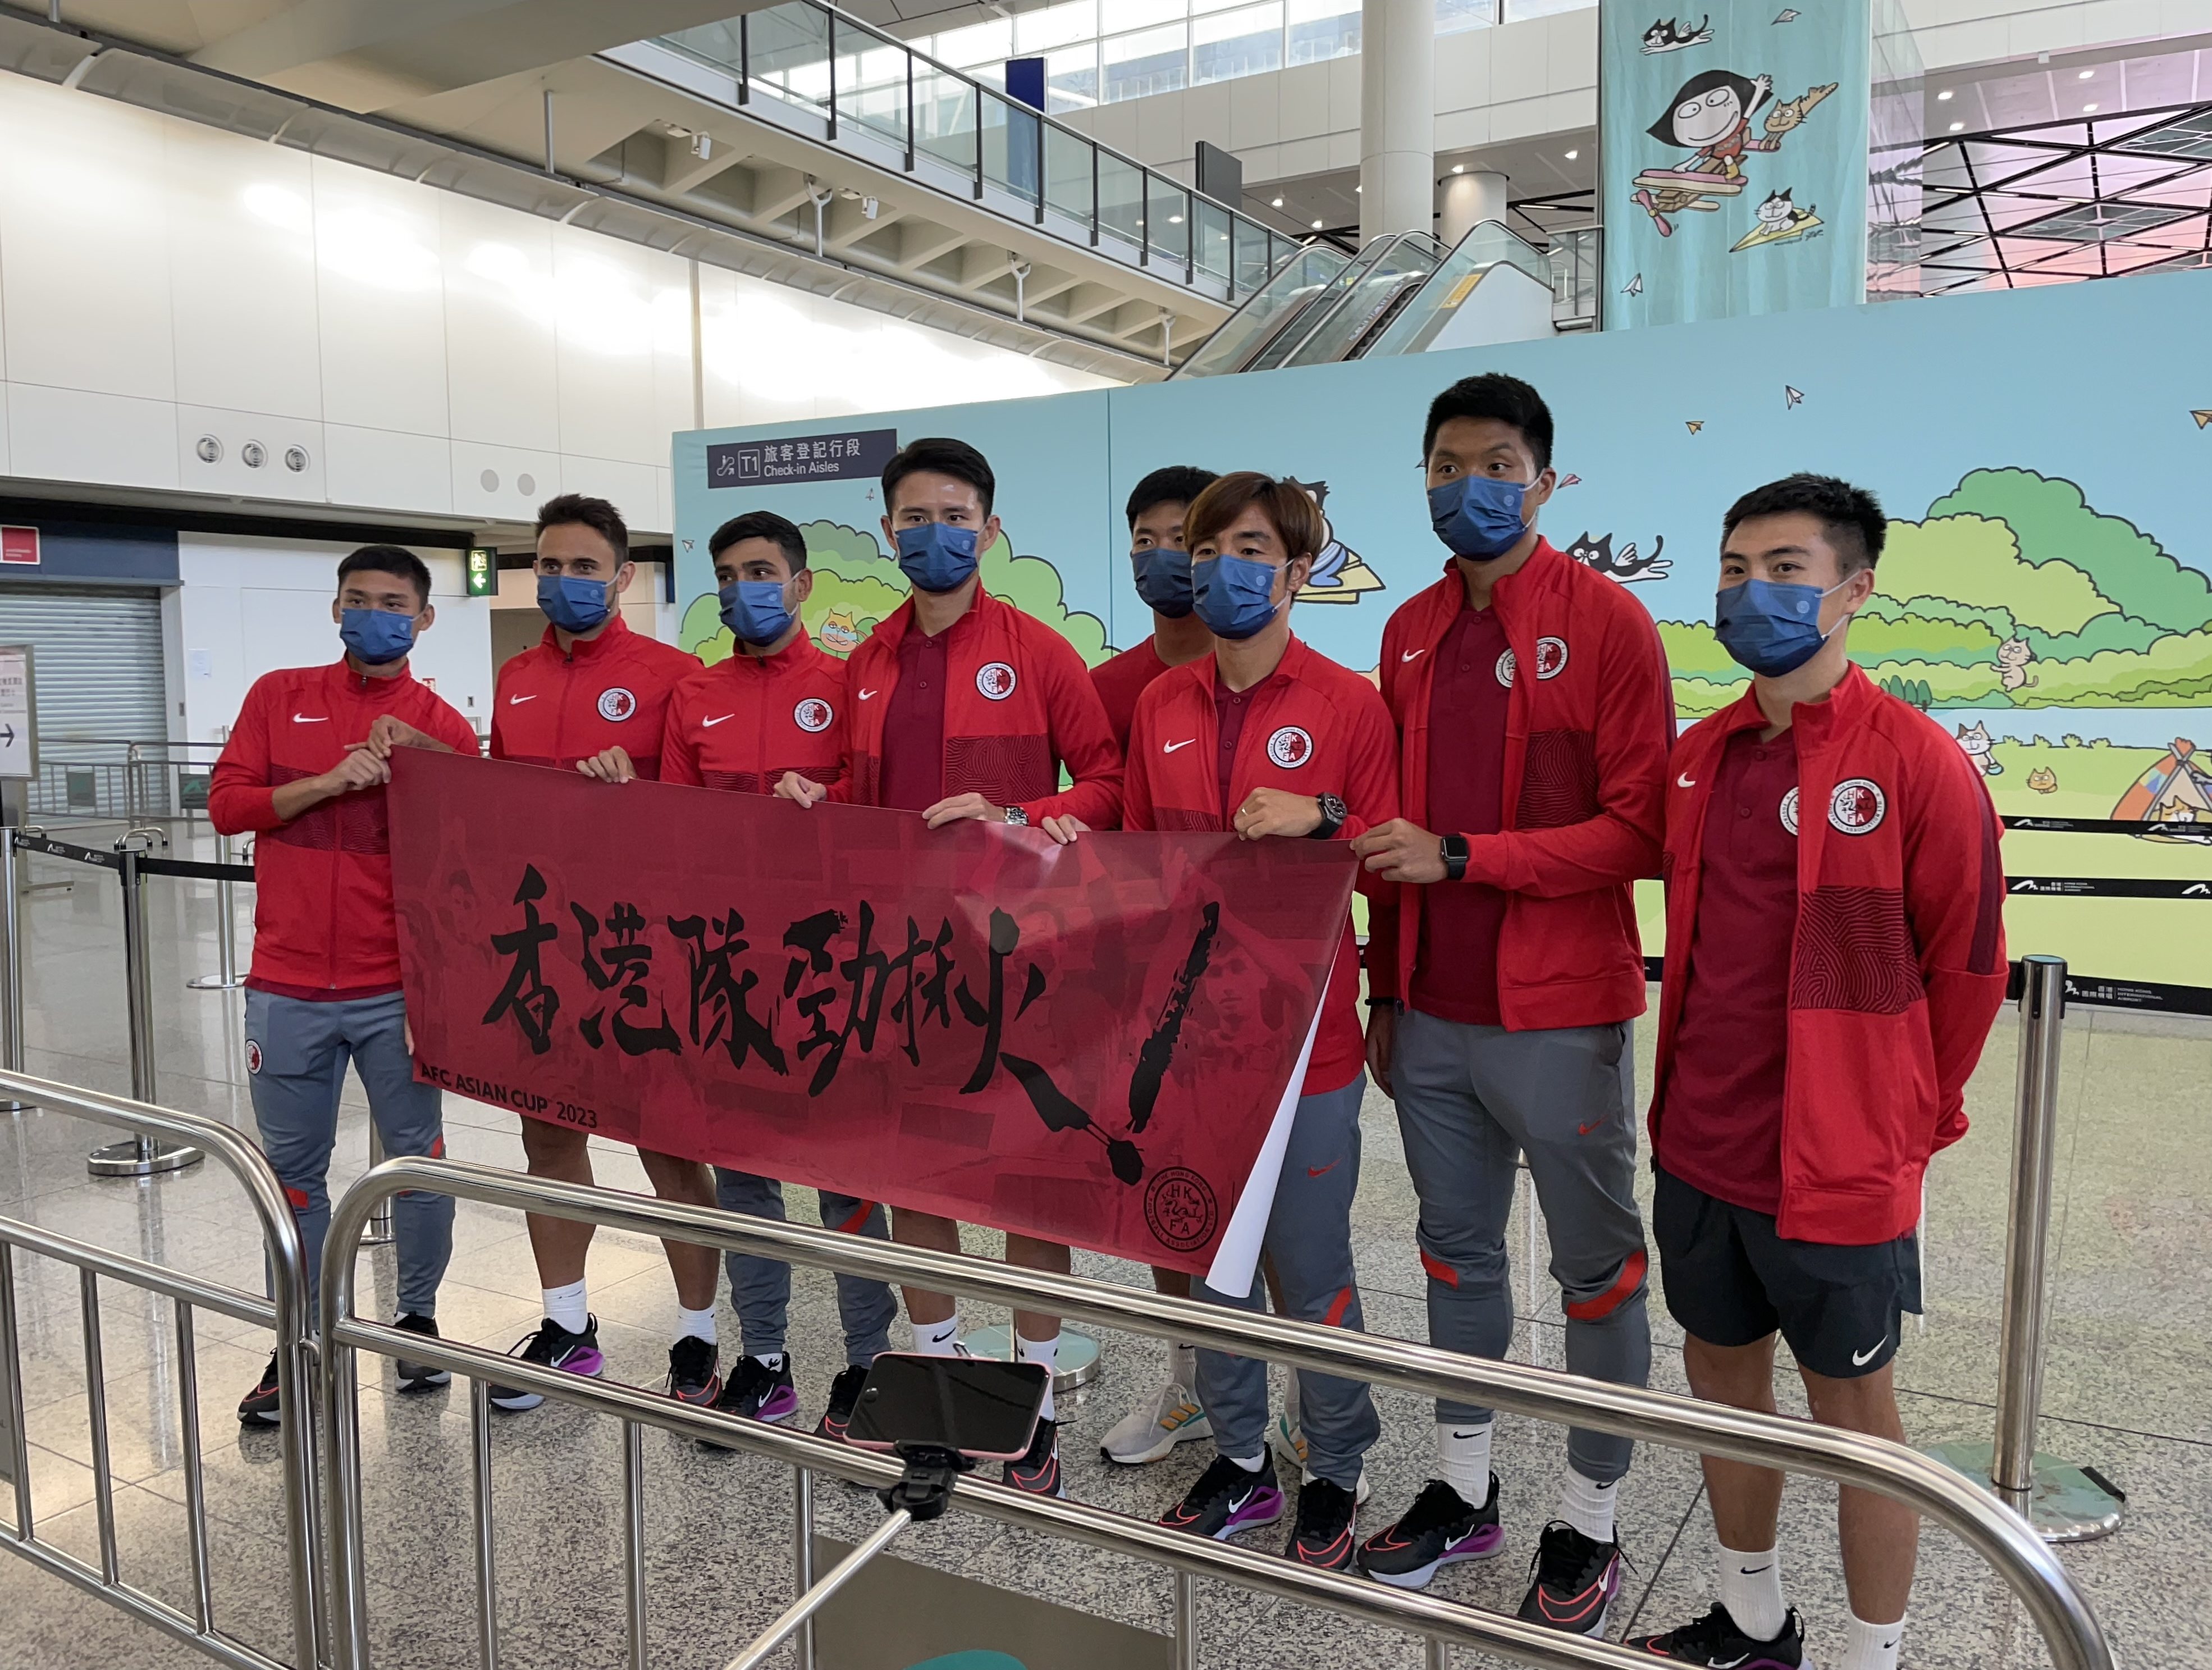 The eight players who completed the journey back from India arrive at Hong Kong airport. Photo: Chan Kin-wa